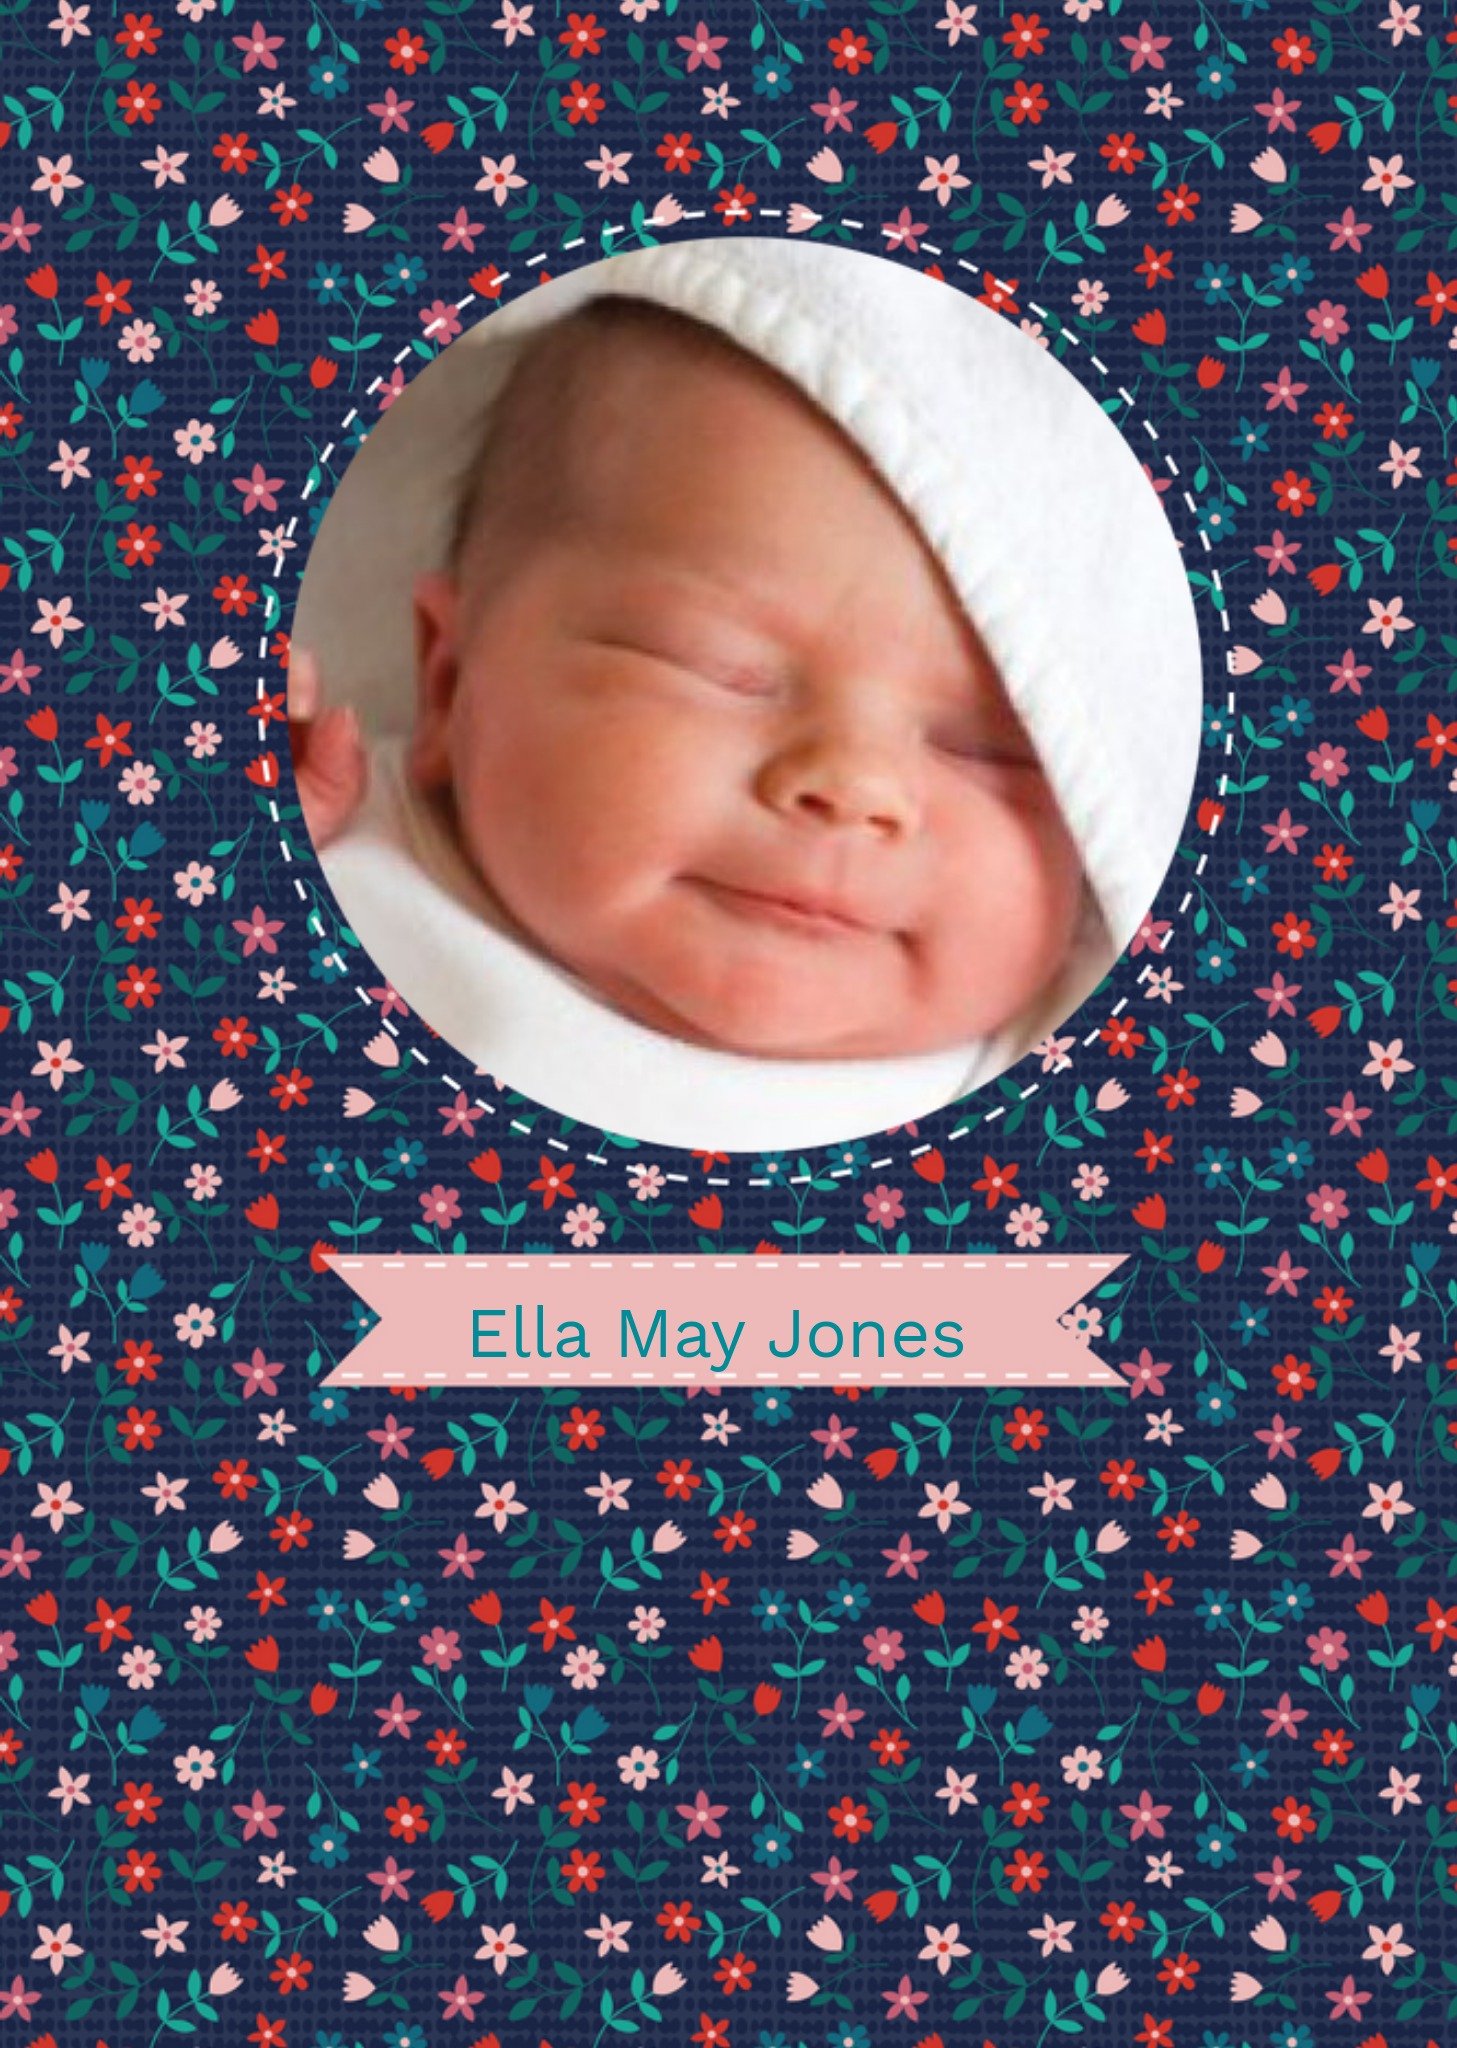 Moonpig Flower Patterned New Baby Photo Card, Standard